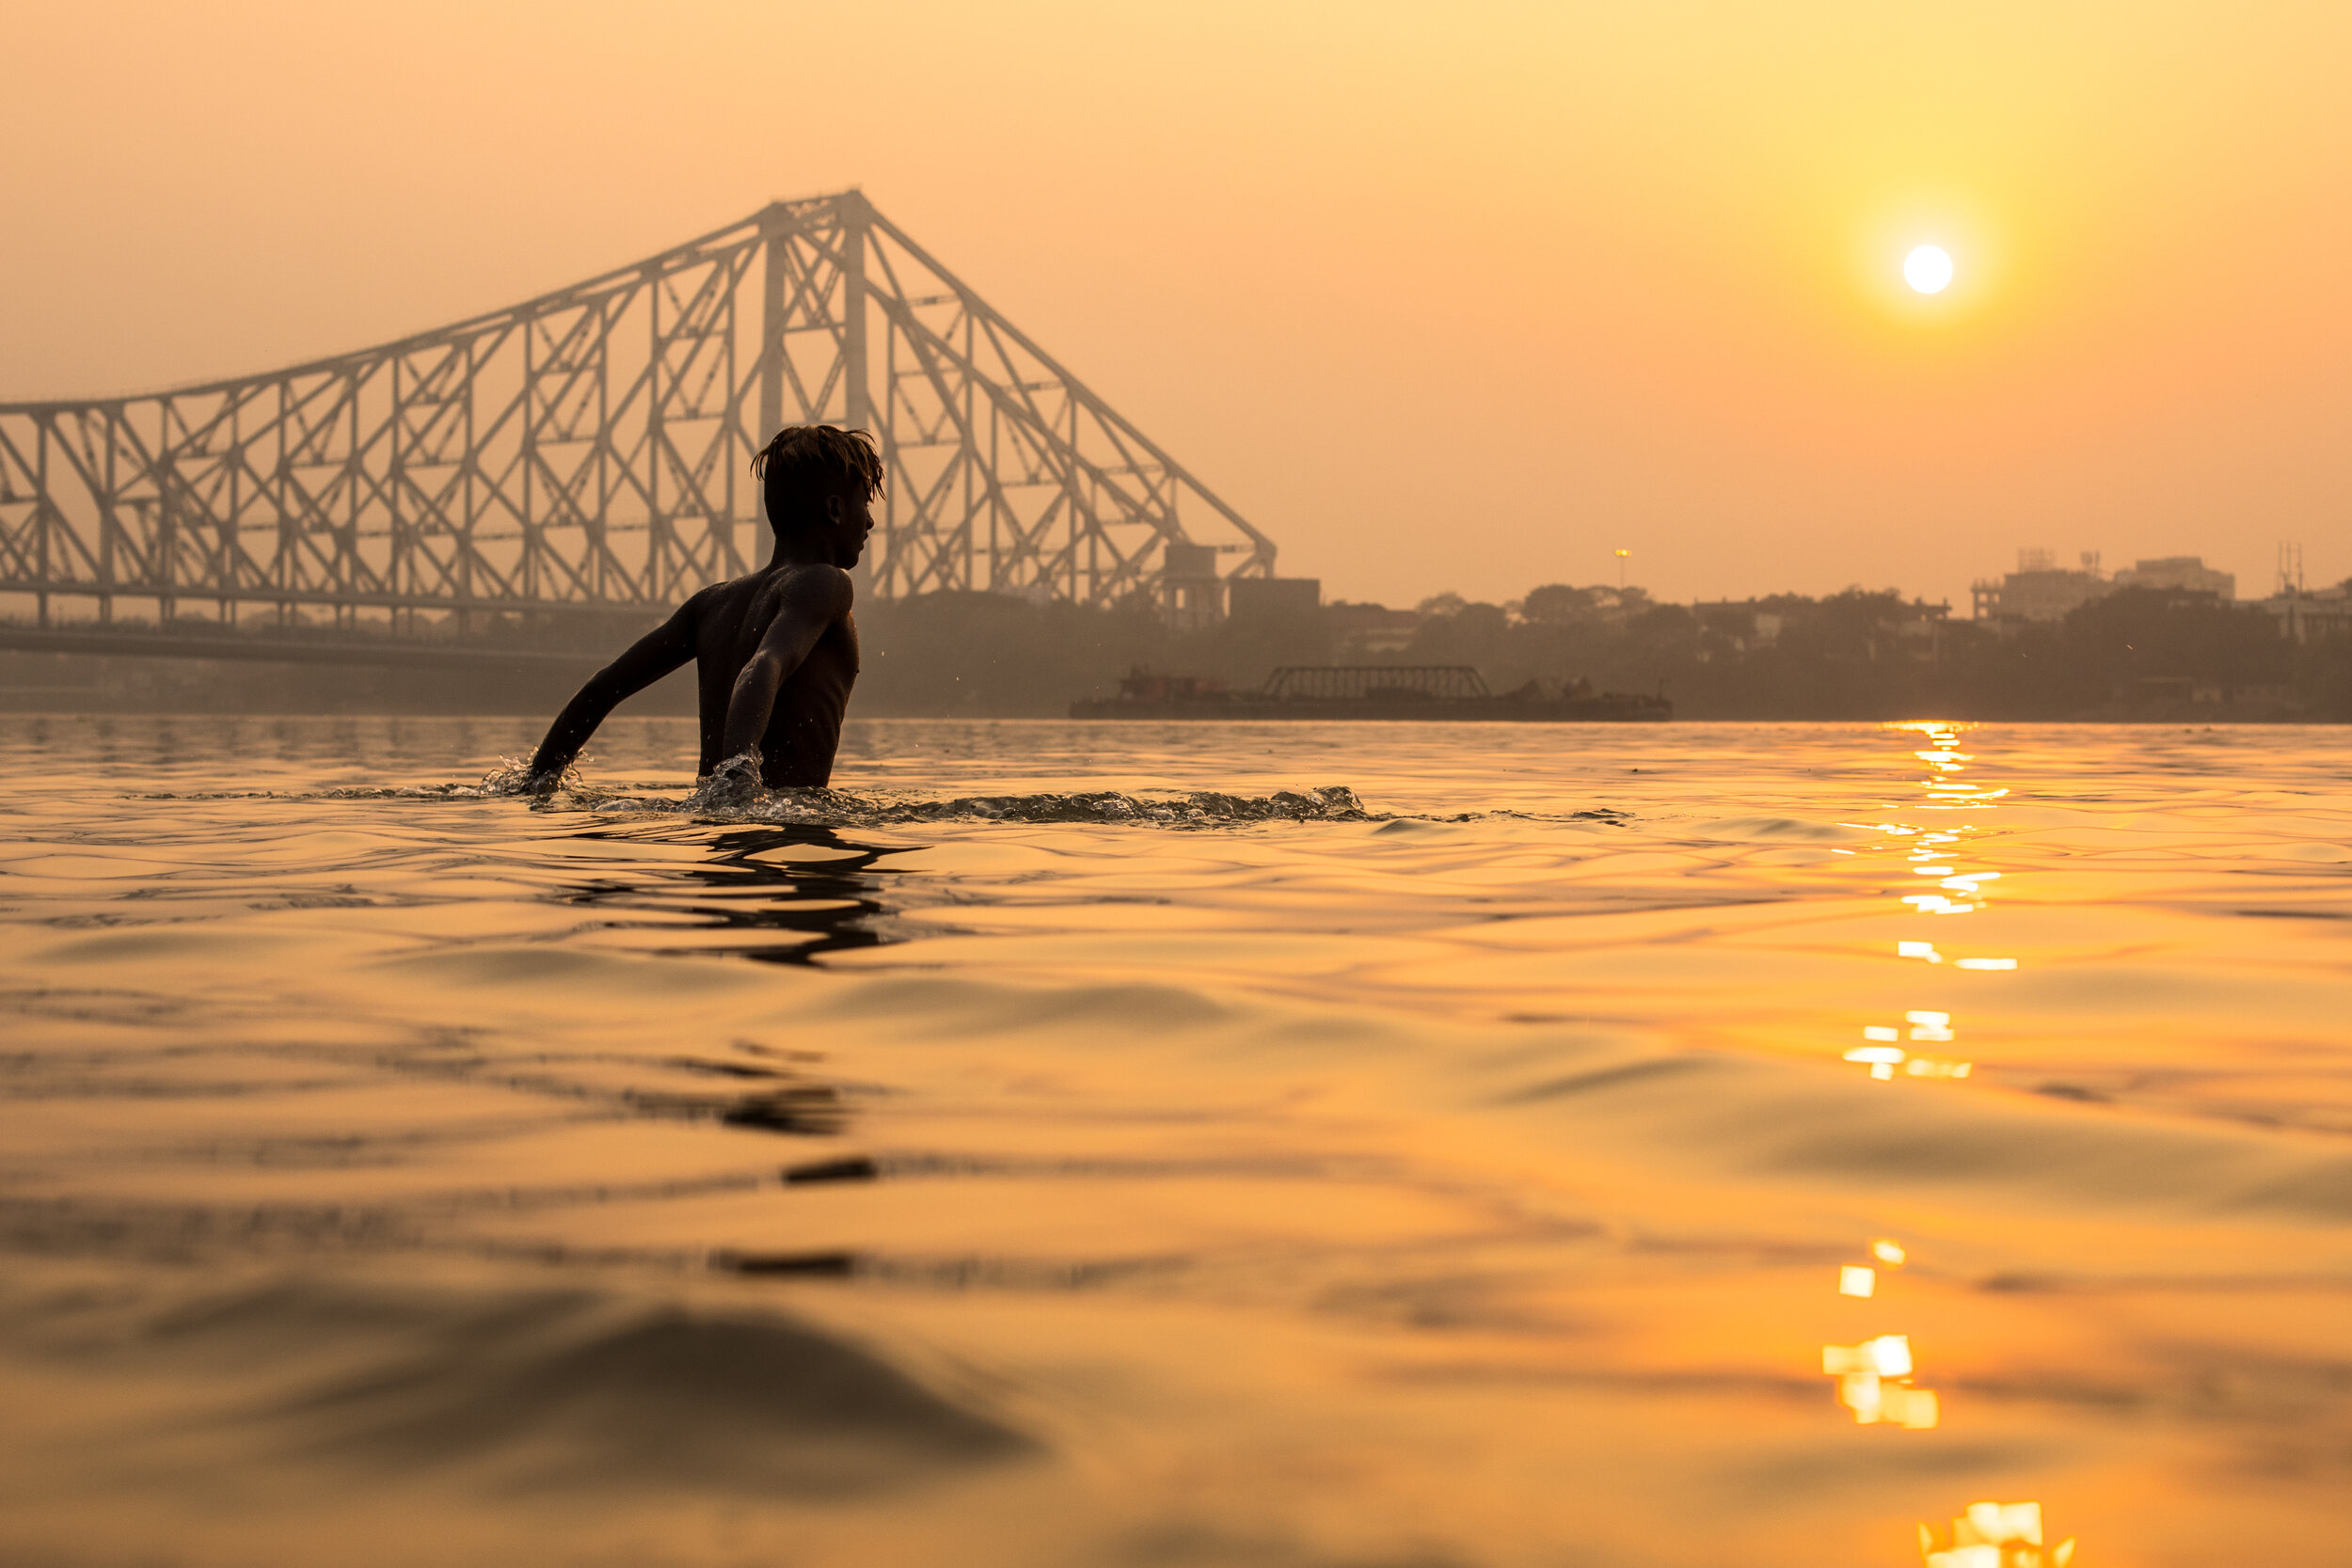 Bathing in the river at sunset, Calcutta, India.